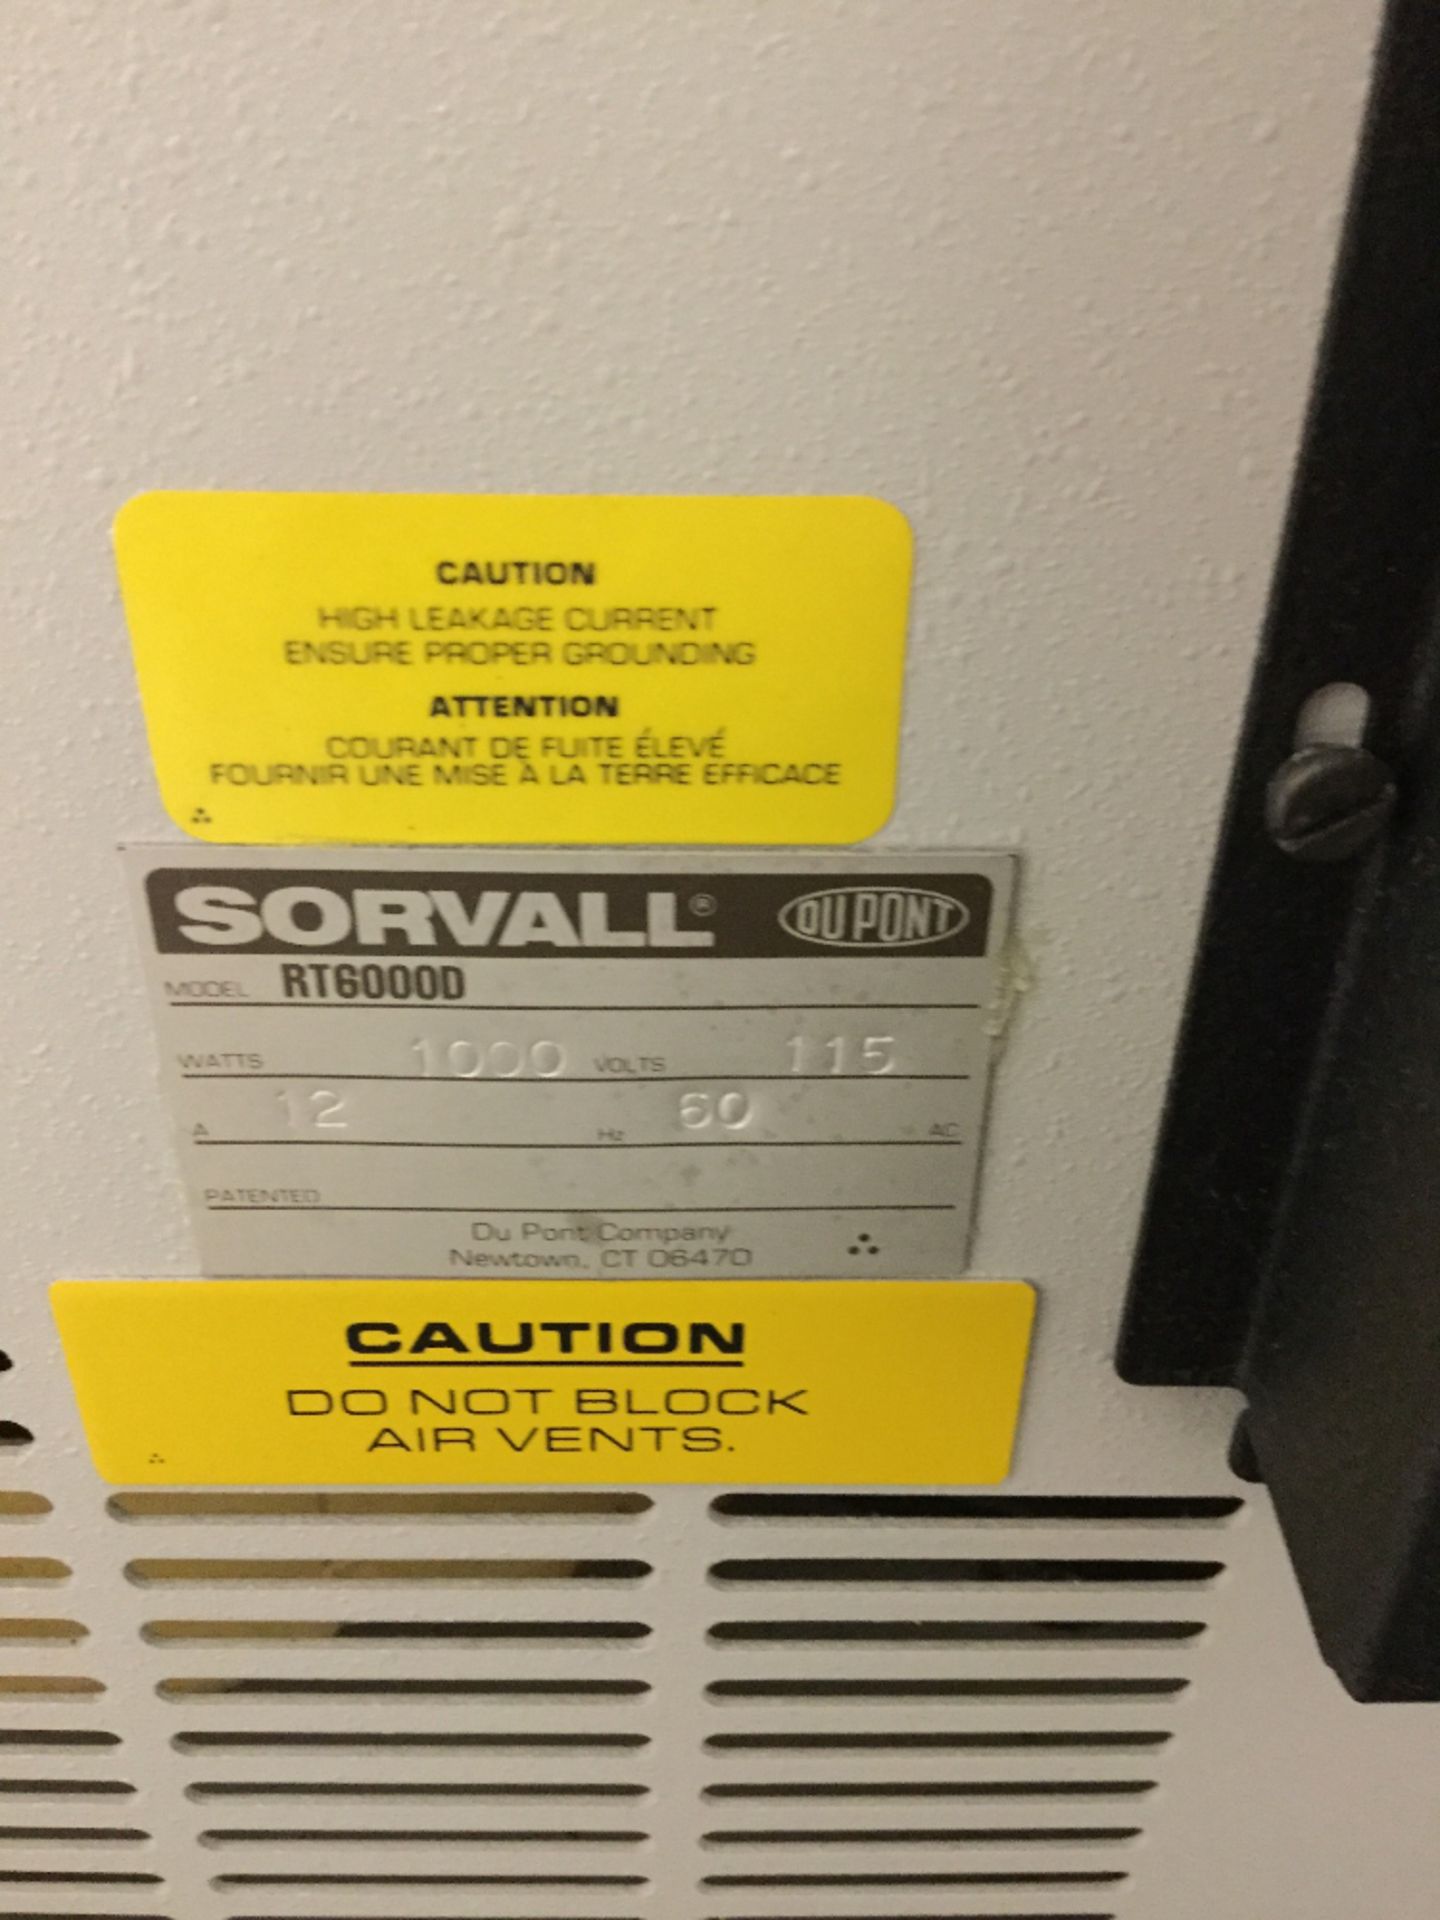 Sorvall RT6000D Refrigerated Tabletop Centrifuge - Image 3 of 4